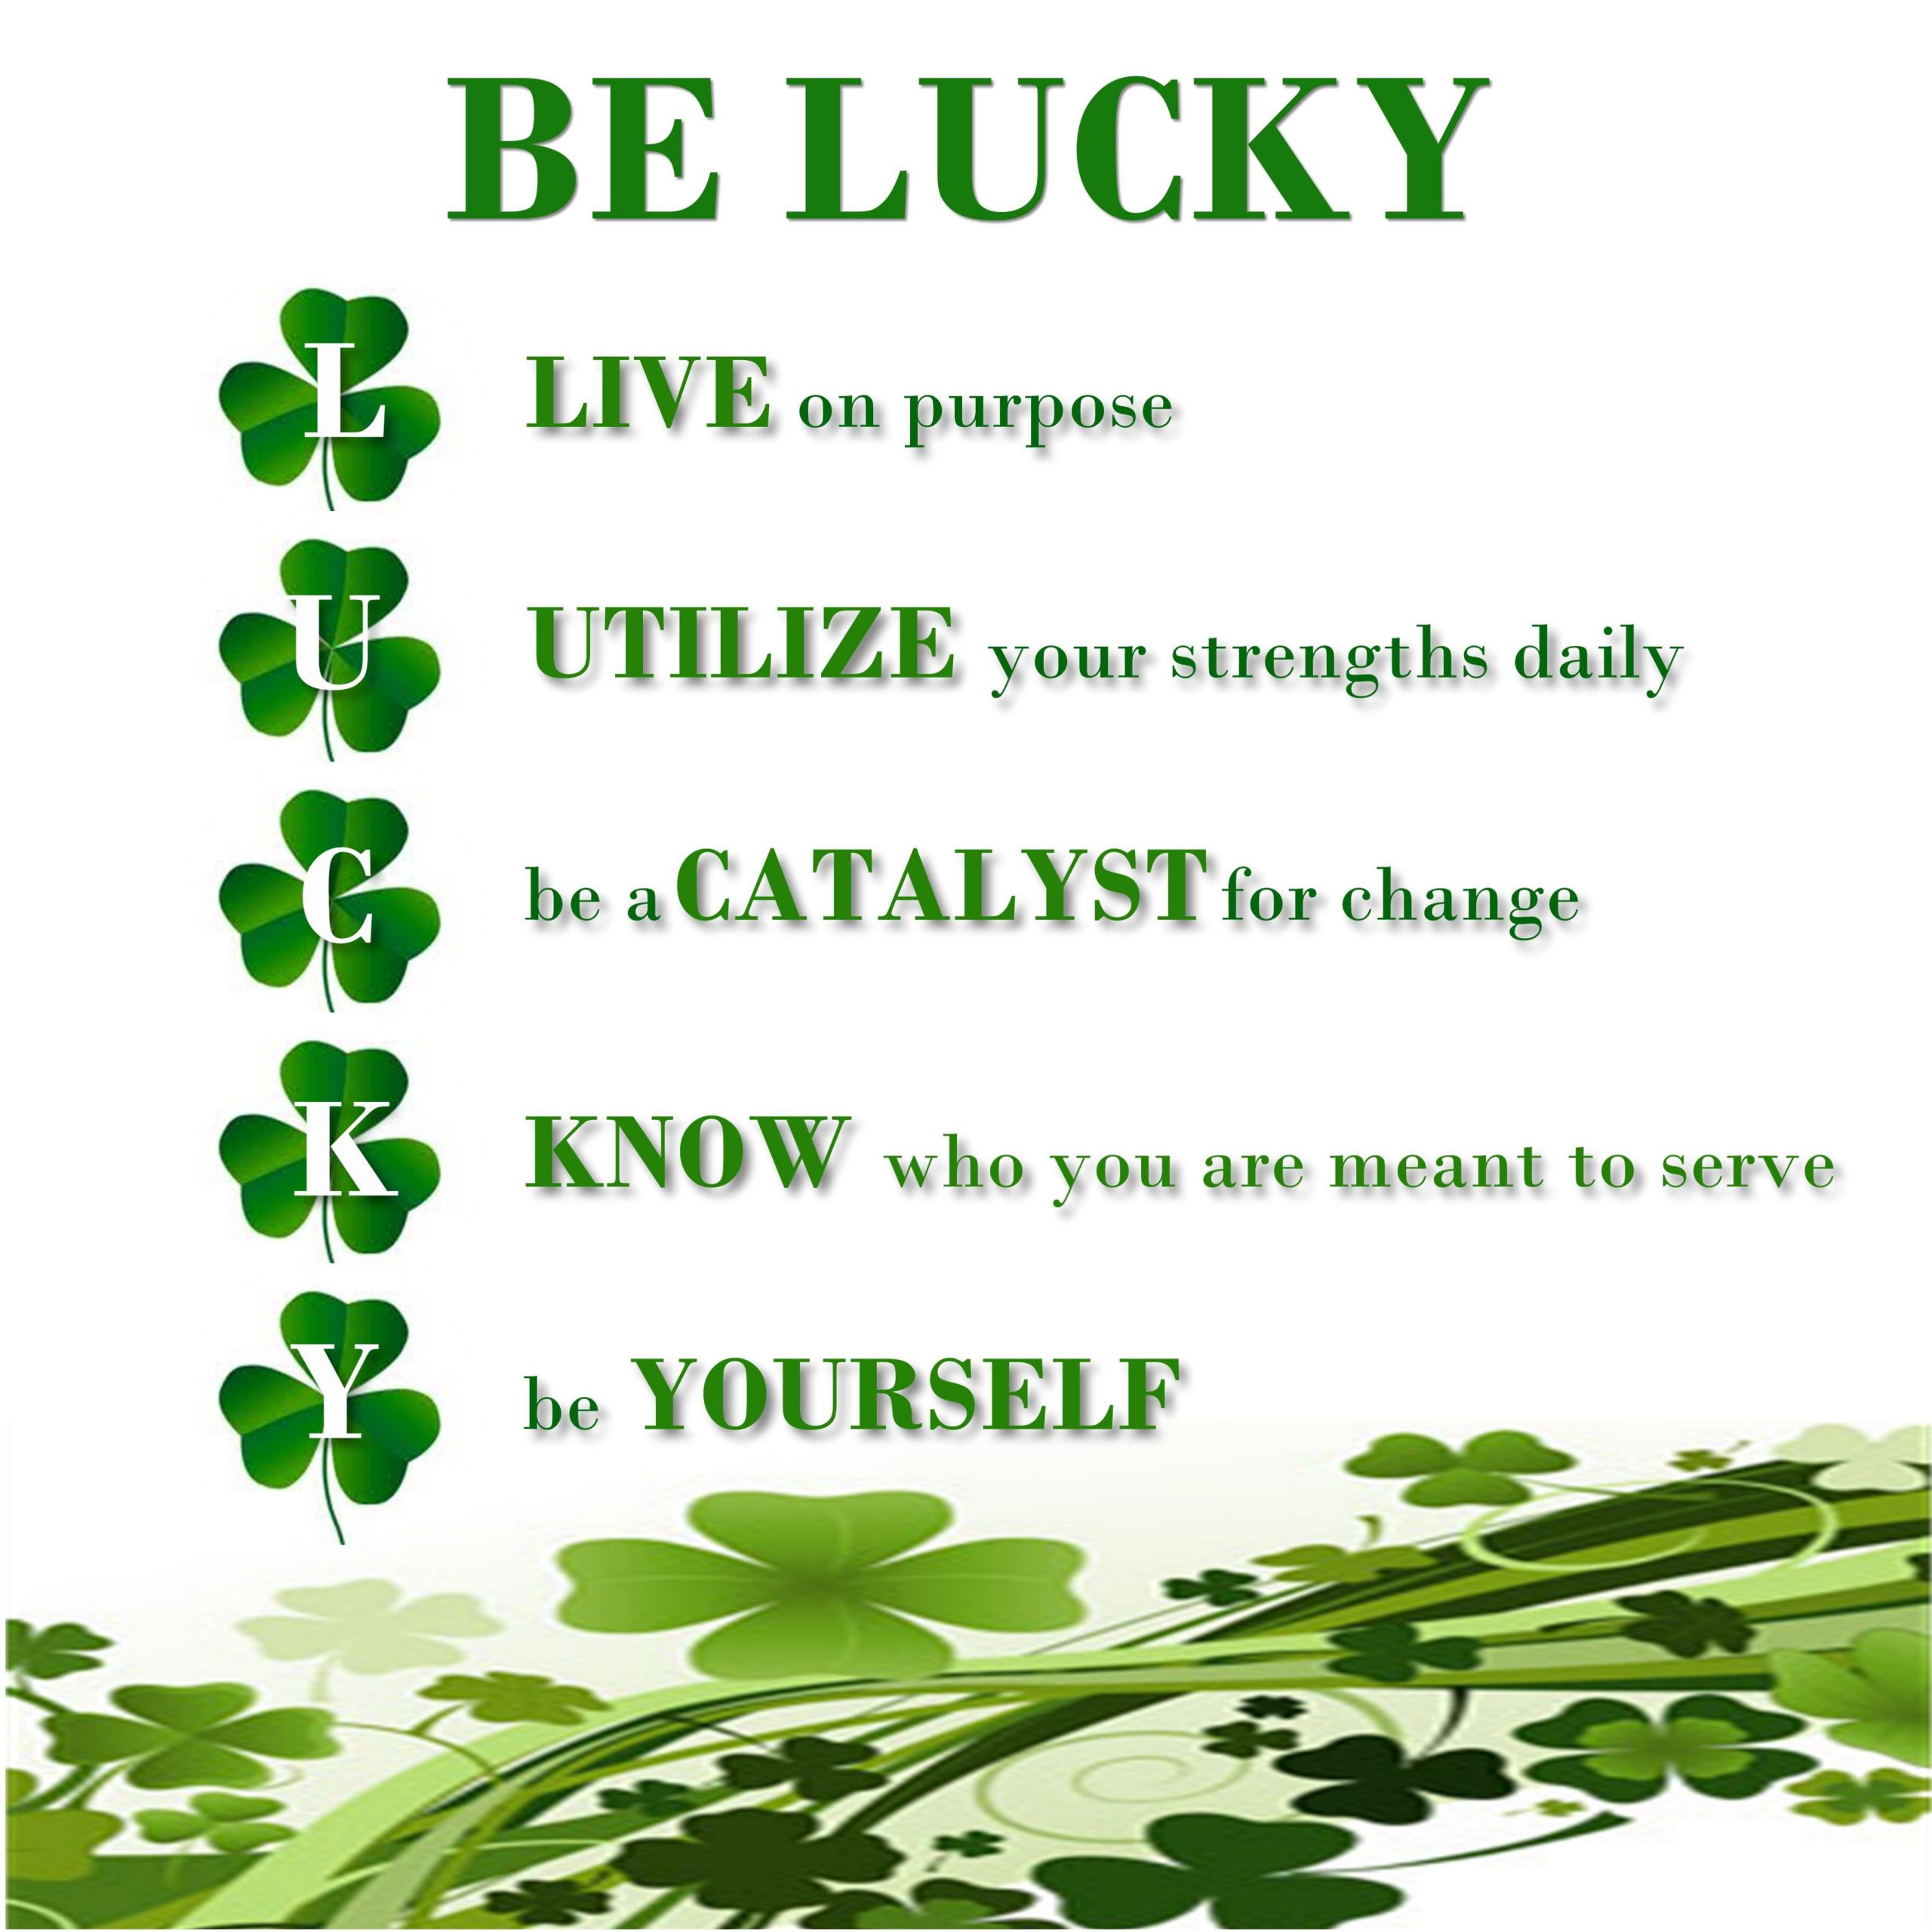 St Patrick's Day Inspirational Quotes
 St Patrick s Day Inspiration Quotes